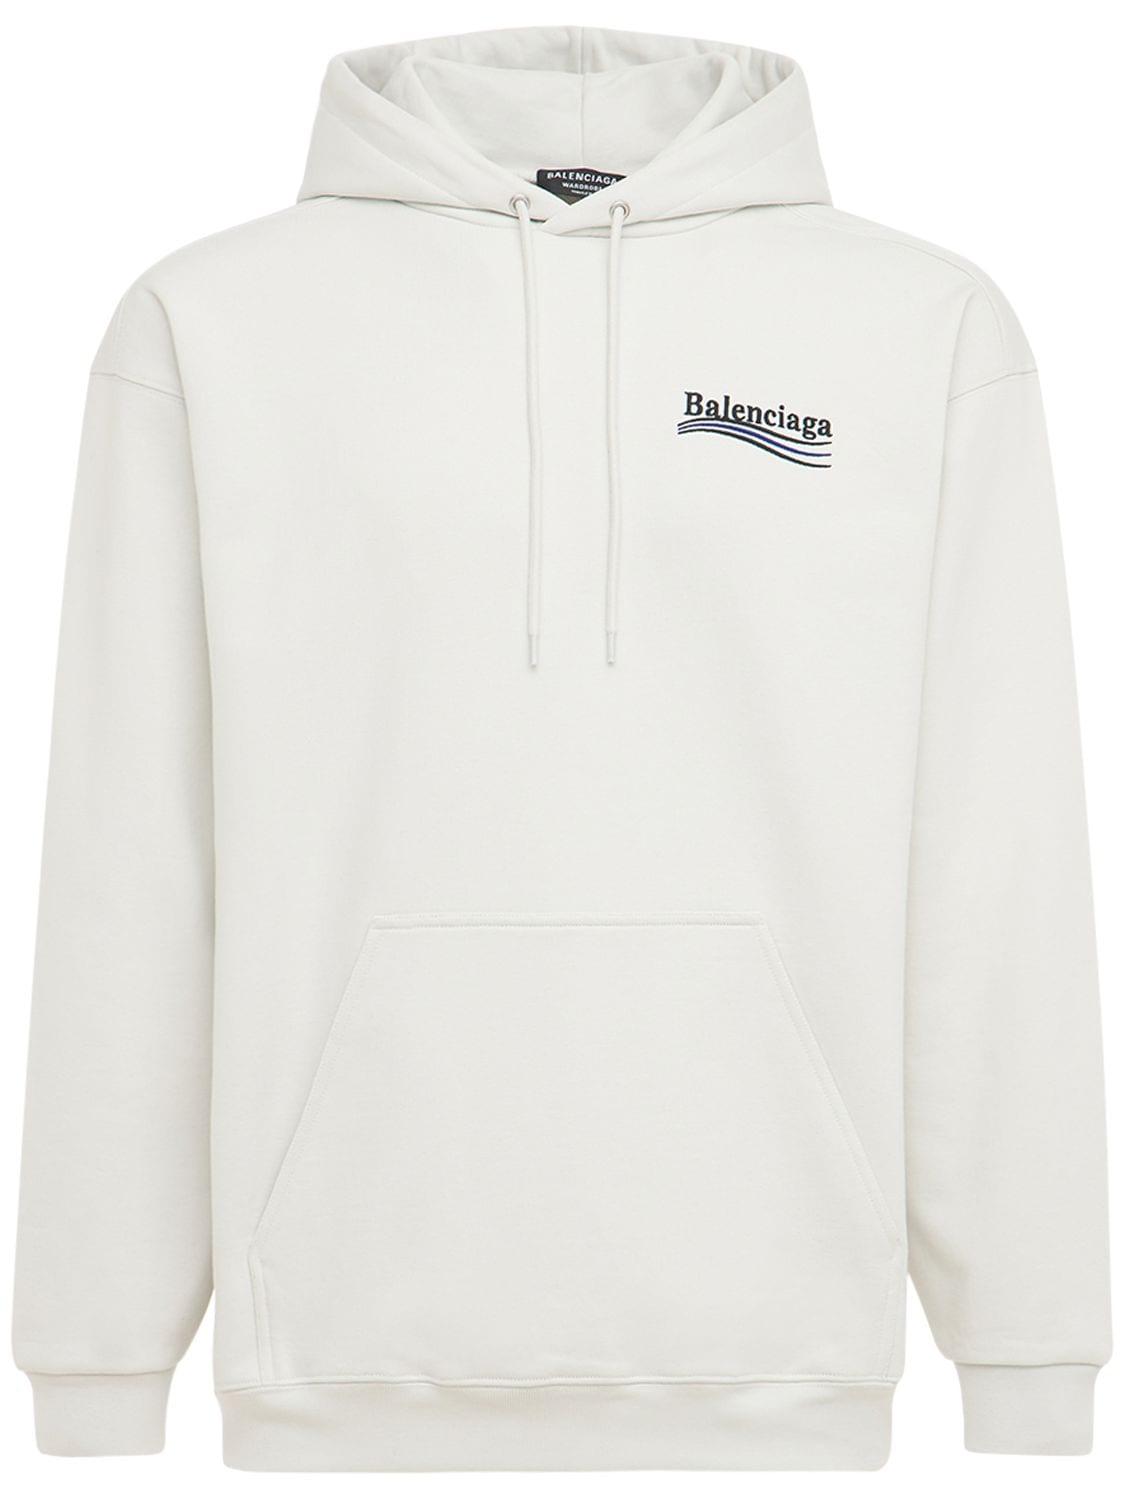 Balenciaga Cotton Political Embroidered Sweatshirt Hoodie in Dirty White  (White) for Men | Lyst